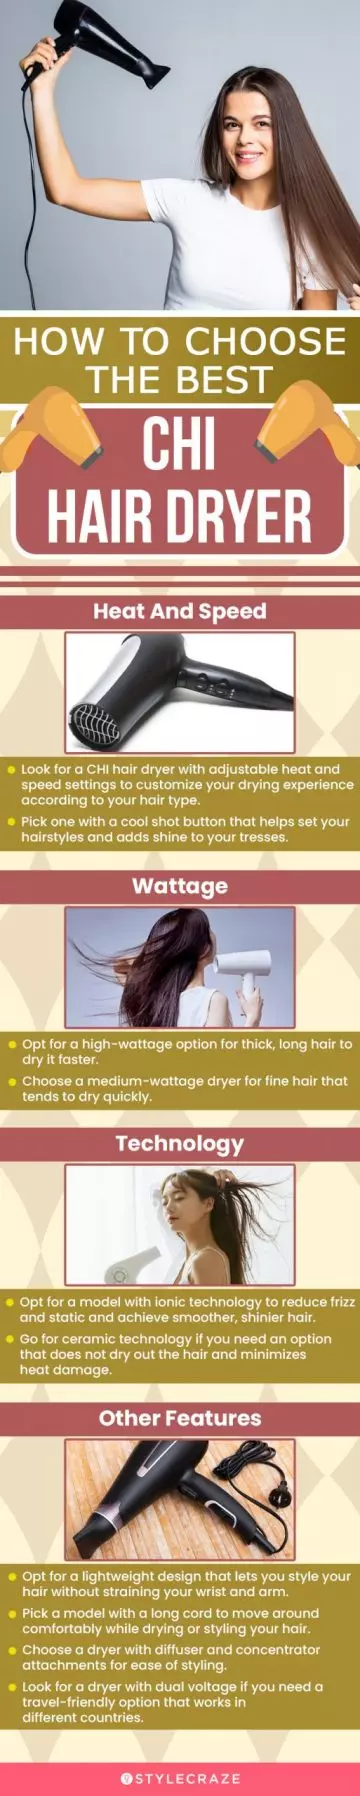 How To Choose The Best CHI Hair Dryers (infographic)